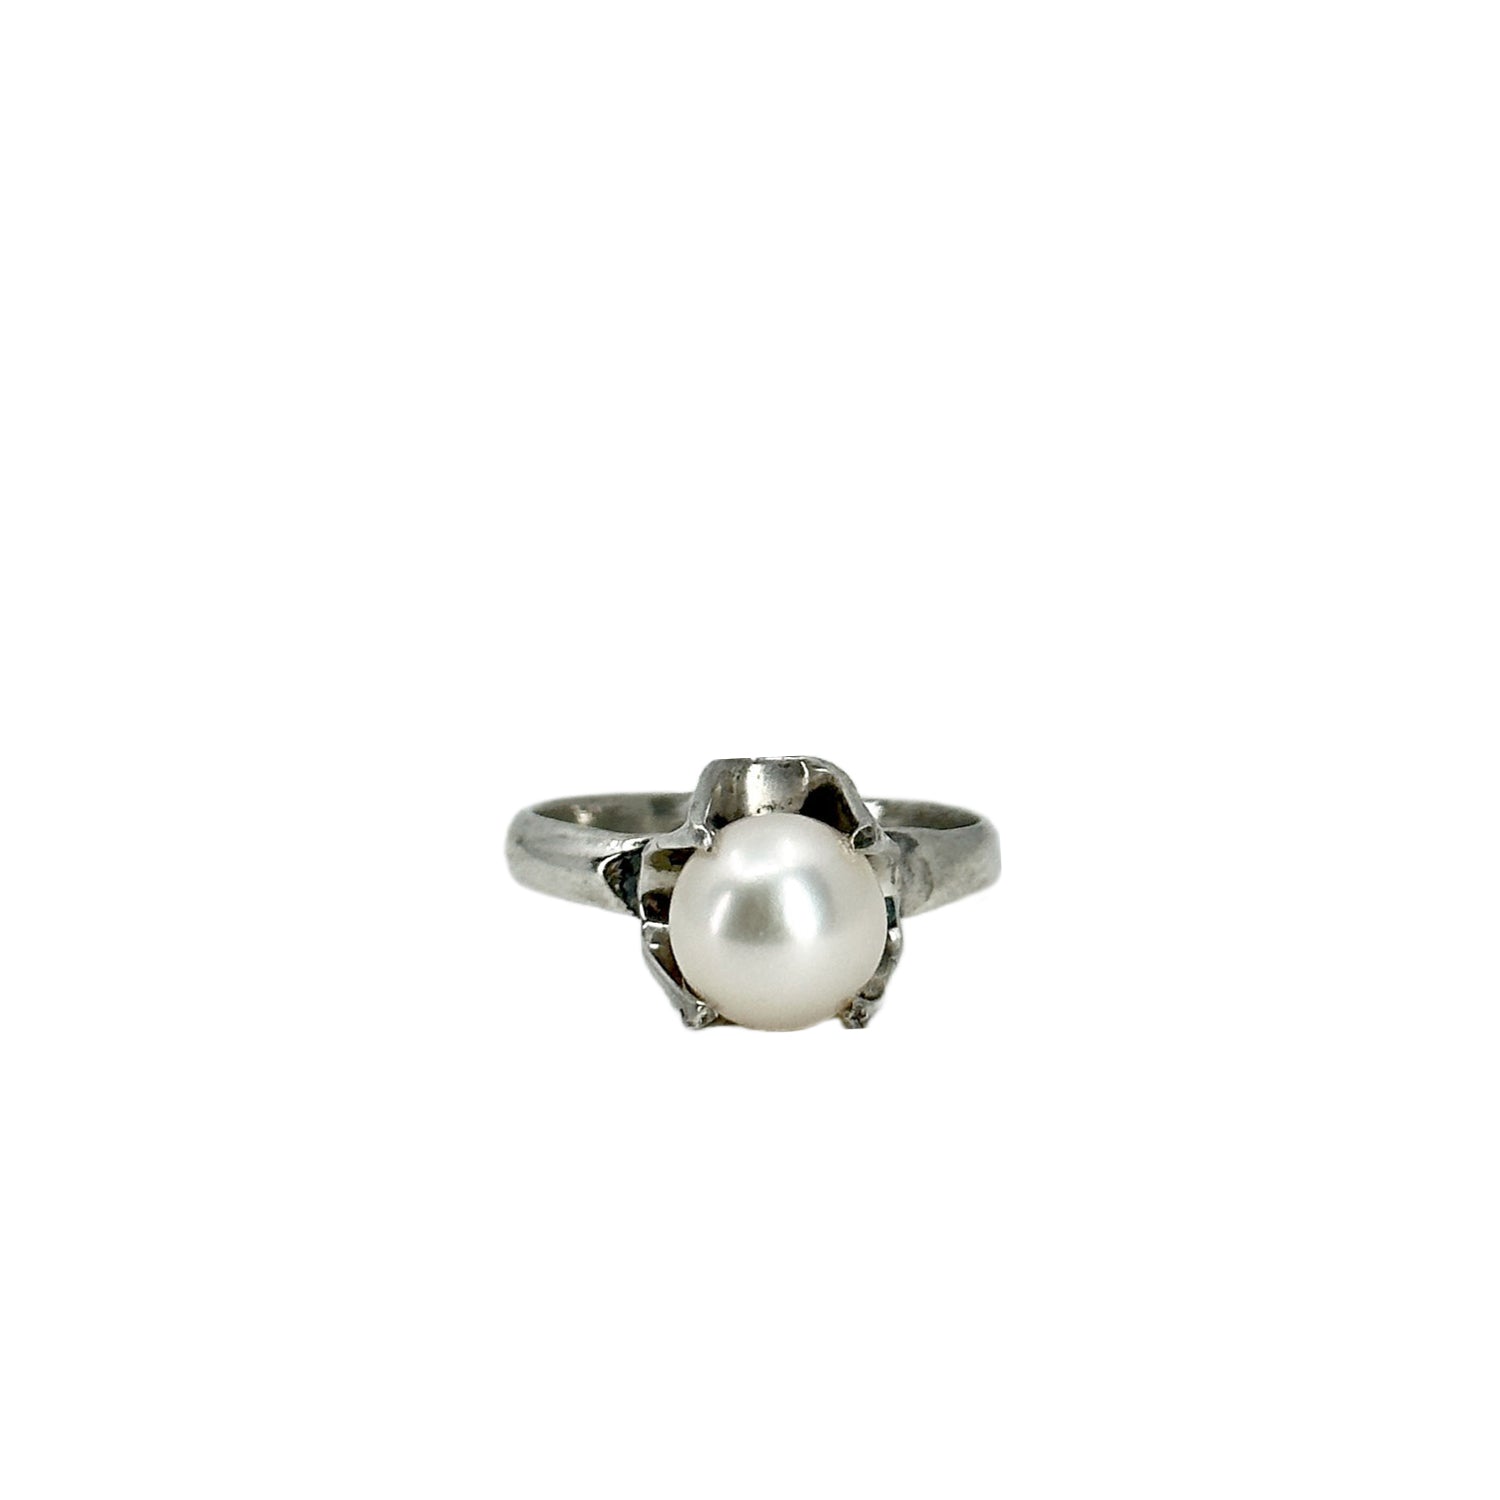 Gothic Solitaire Japanese Saltwater Akoya Cultured Pearl Buttercup Ring- Sterling Silver Sz 5